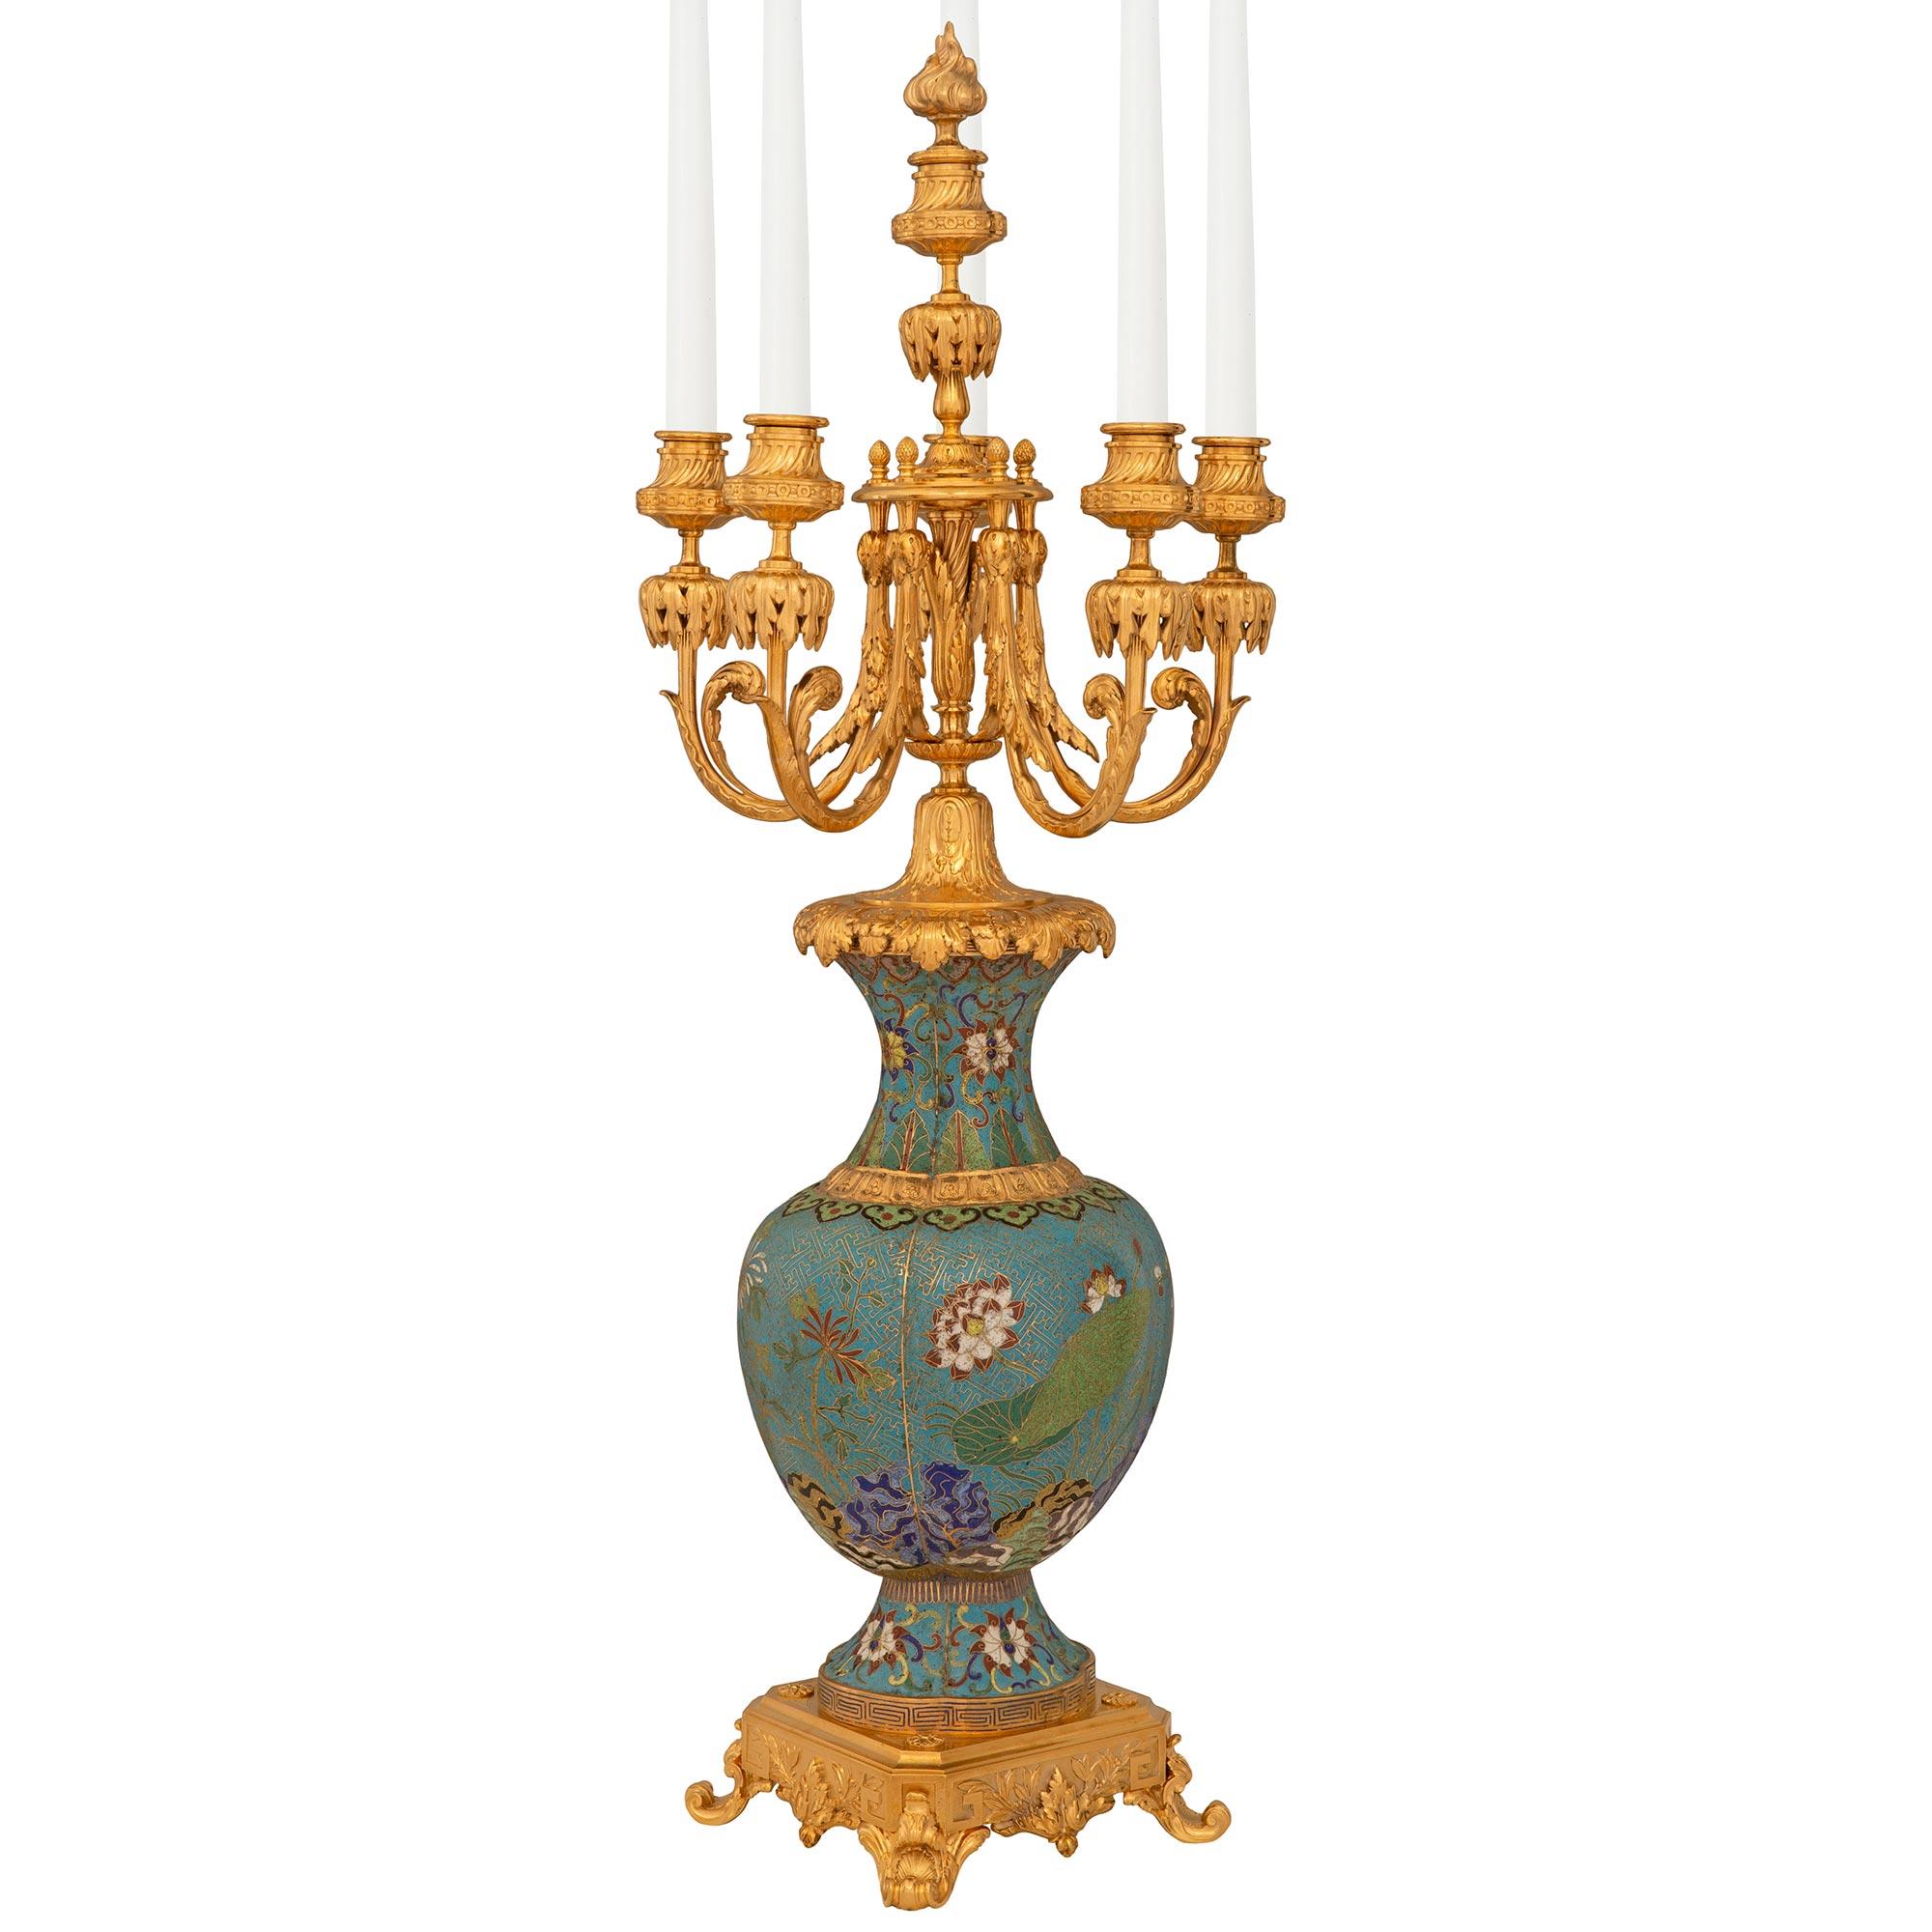 A beautifully and high quality pair of French 19th century Louis XV st. Cloisonné and Ormolu candelabras, signed F. Barbedienne. Each six arm candelabra is raised by a square Ormolu pedestal with Greek Key designs, laurel vines, and foliate central